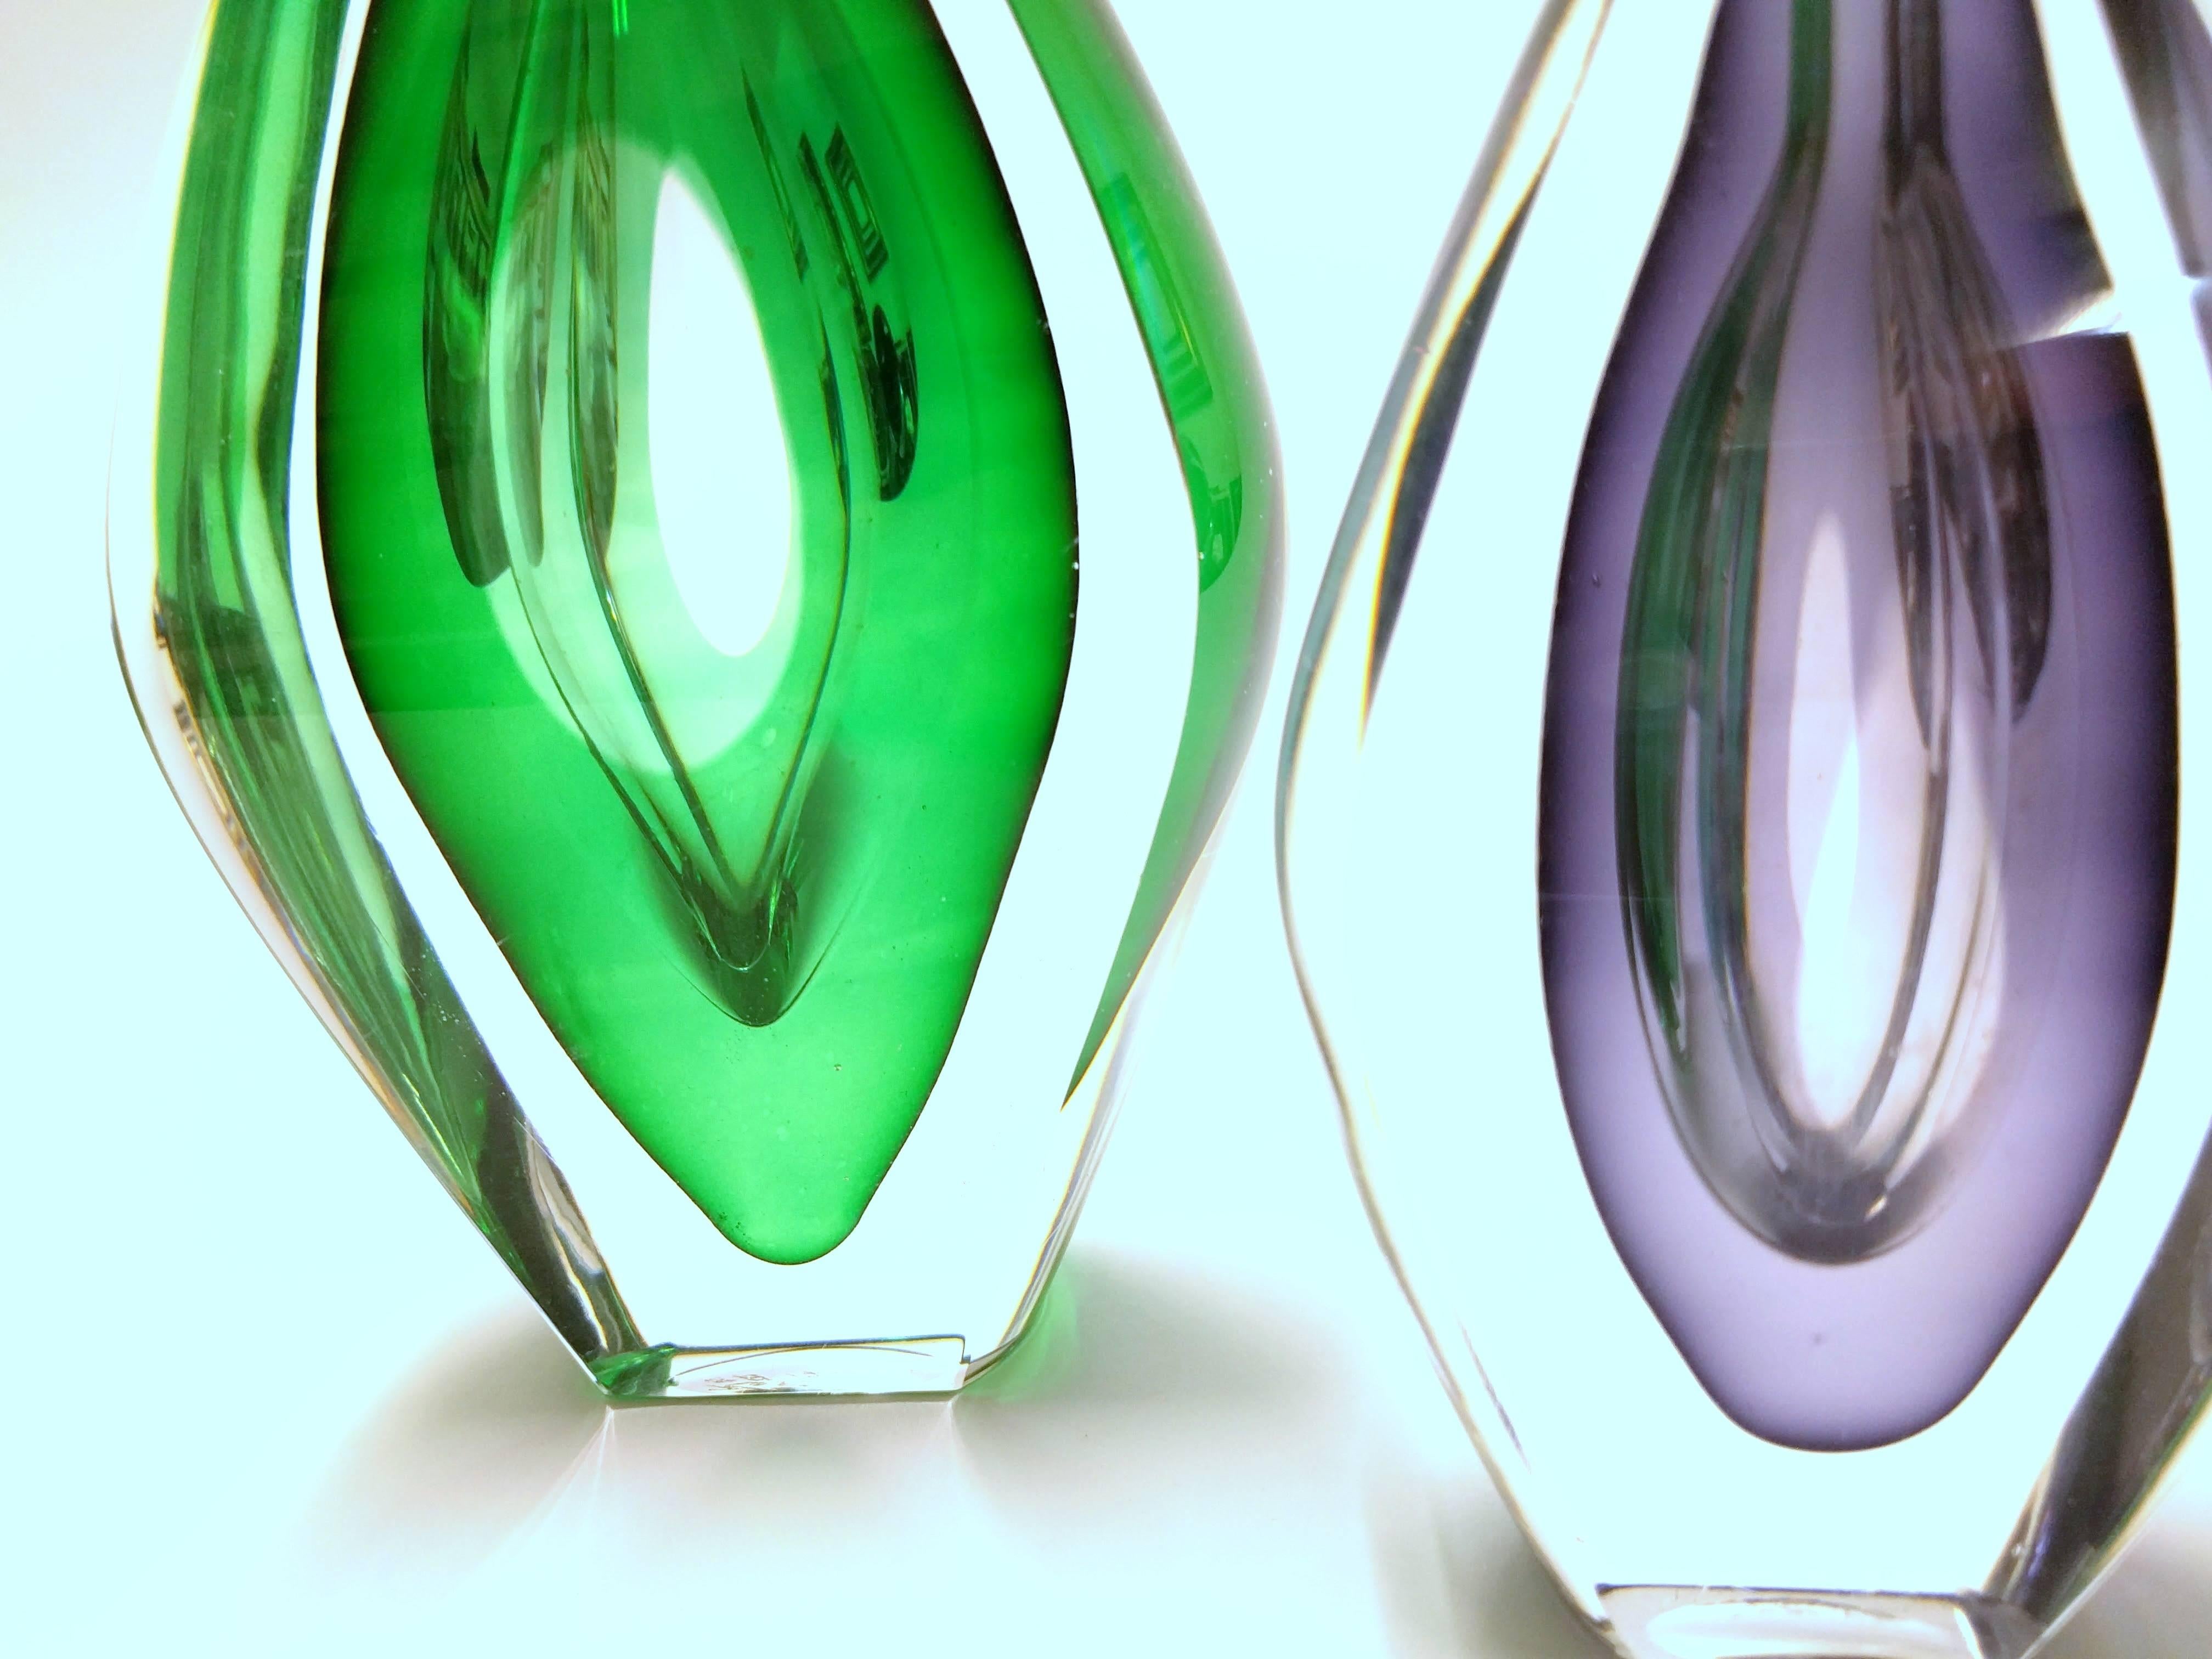 Beautiful signed Kosta vases by Mona Morales-Schildt. Pair of two.
One green and one purple vase.
Measures: The green vase is 16 cm high, the purple one is 12 cm high.
Good condition.